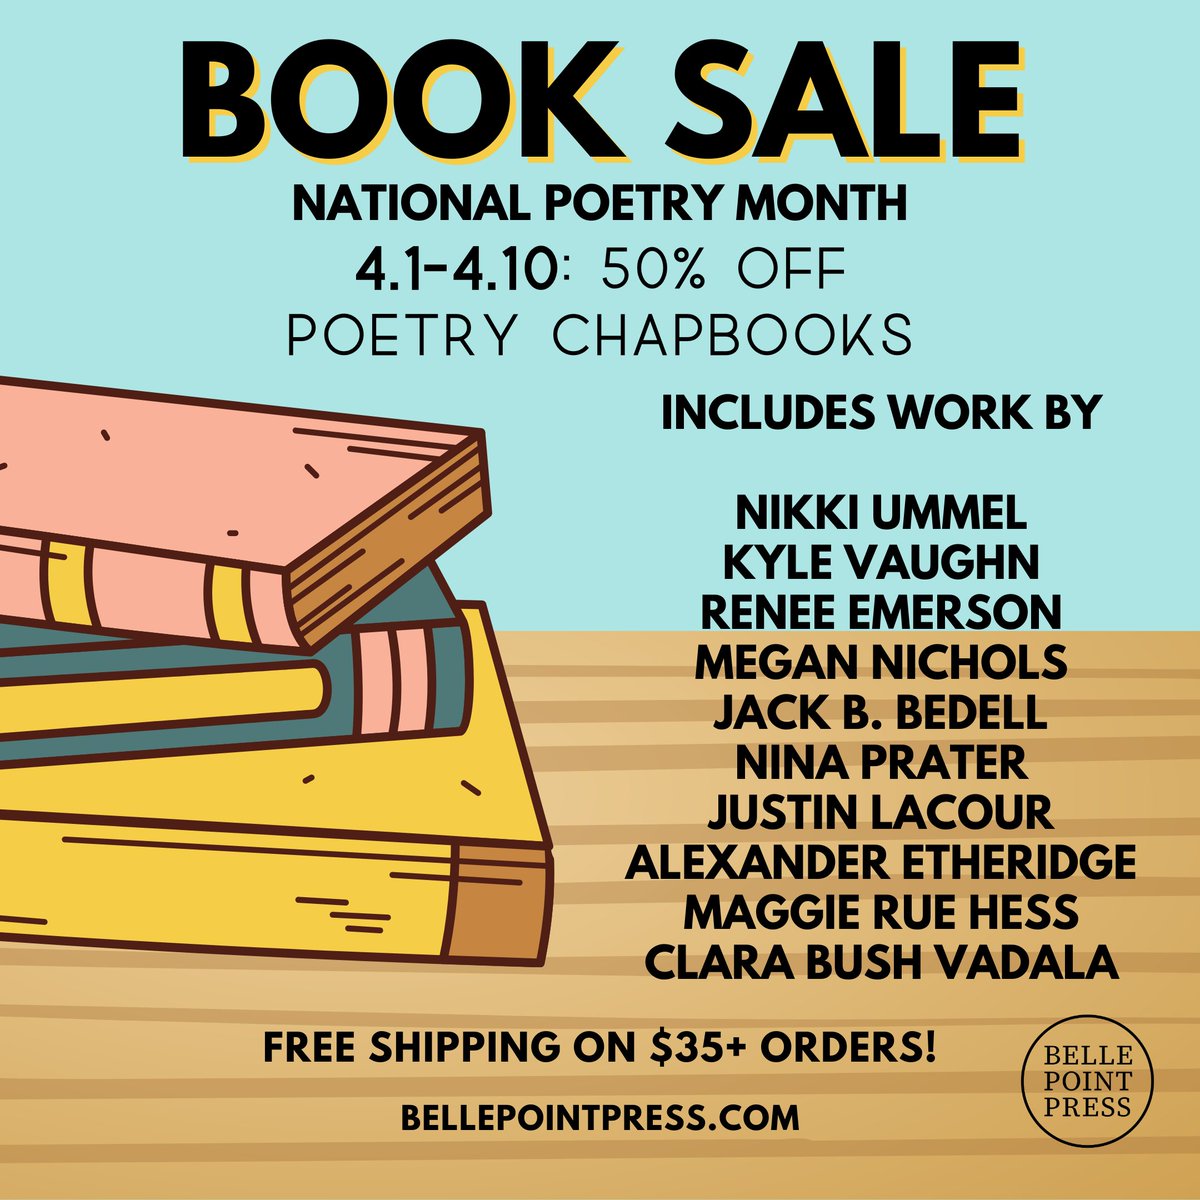 Have you heard? It's National Poetry Month and we have some stellar sales coming your way--starting with HALF OFF our poetry chaps from now through 4/10! Discount applies automatically at checkout: bellepointpress.com/collections/bo…